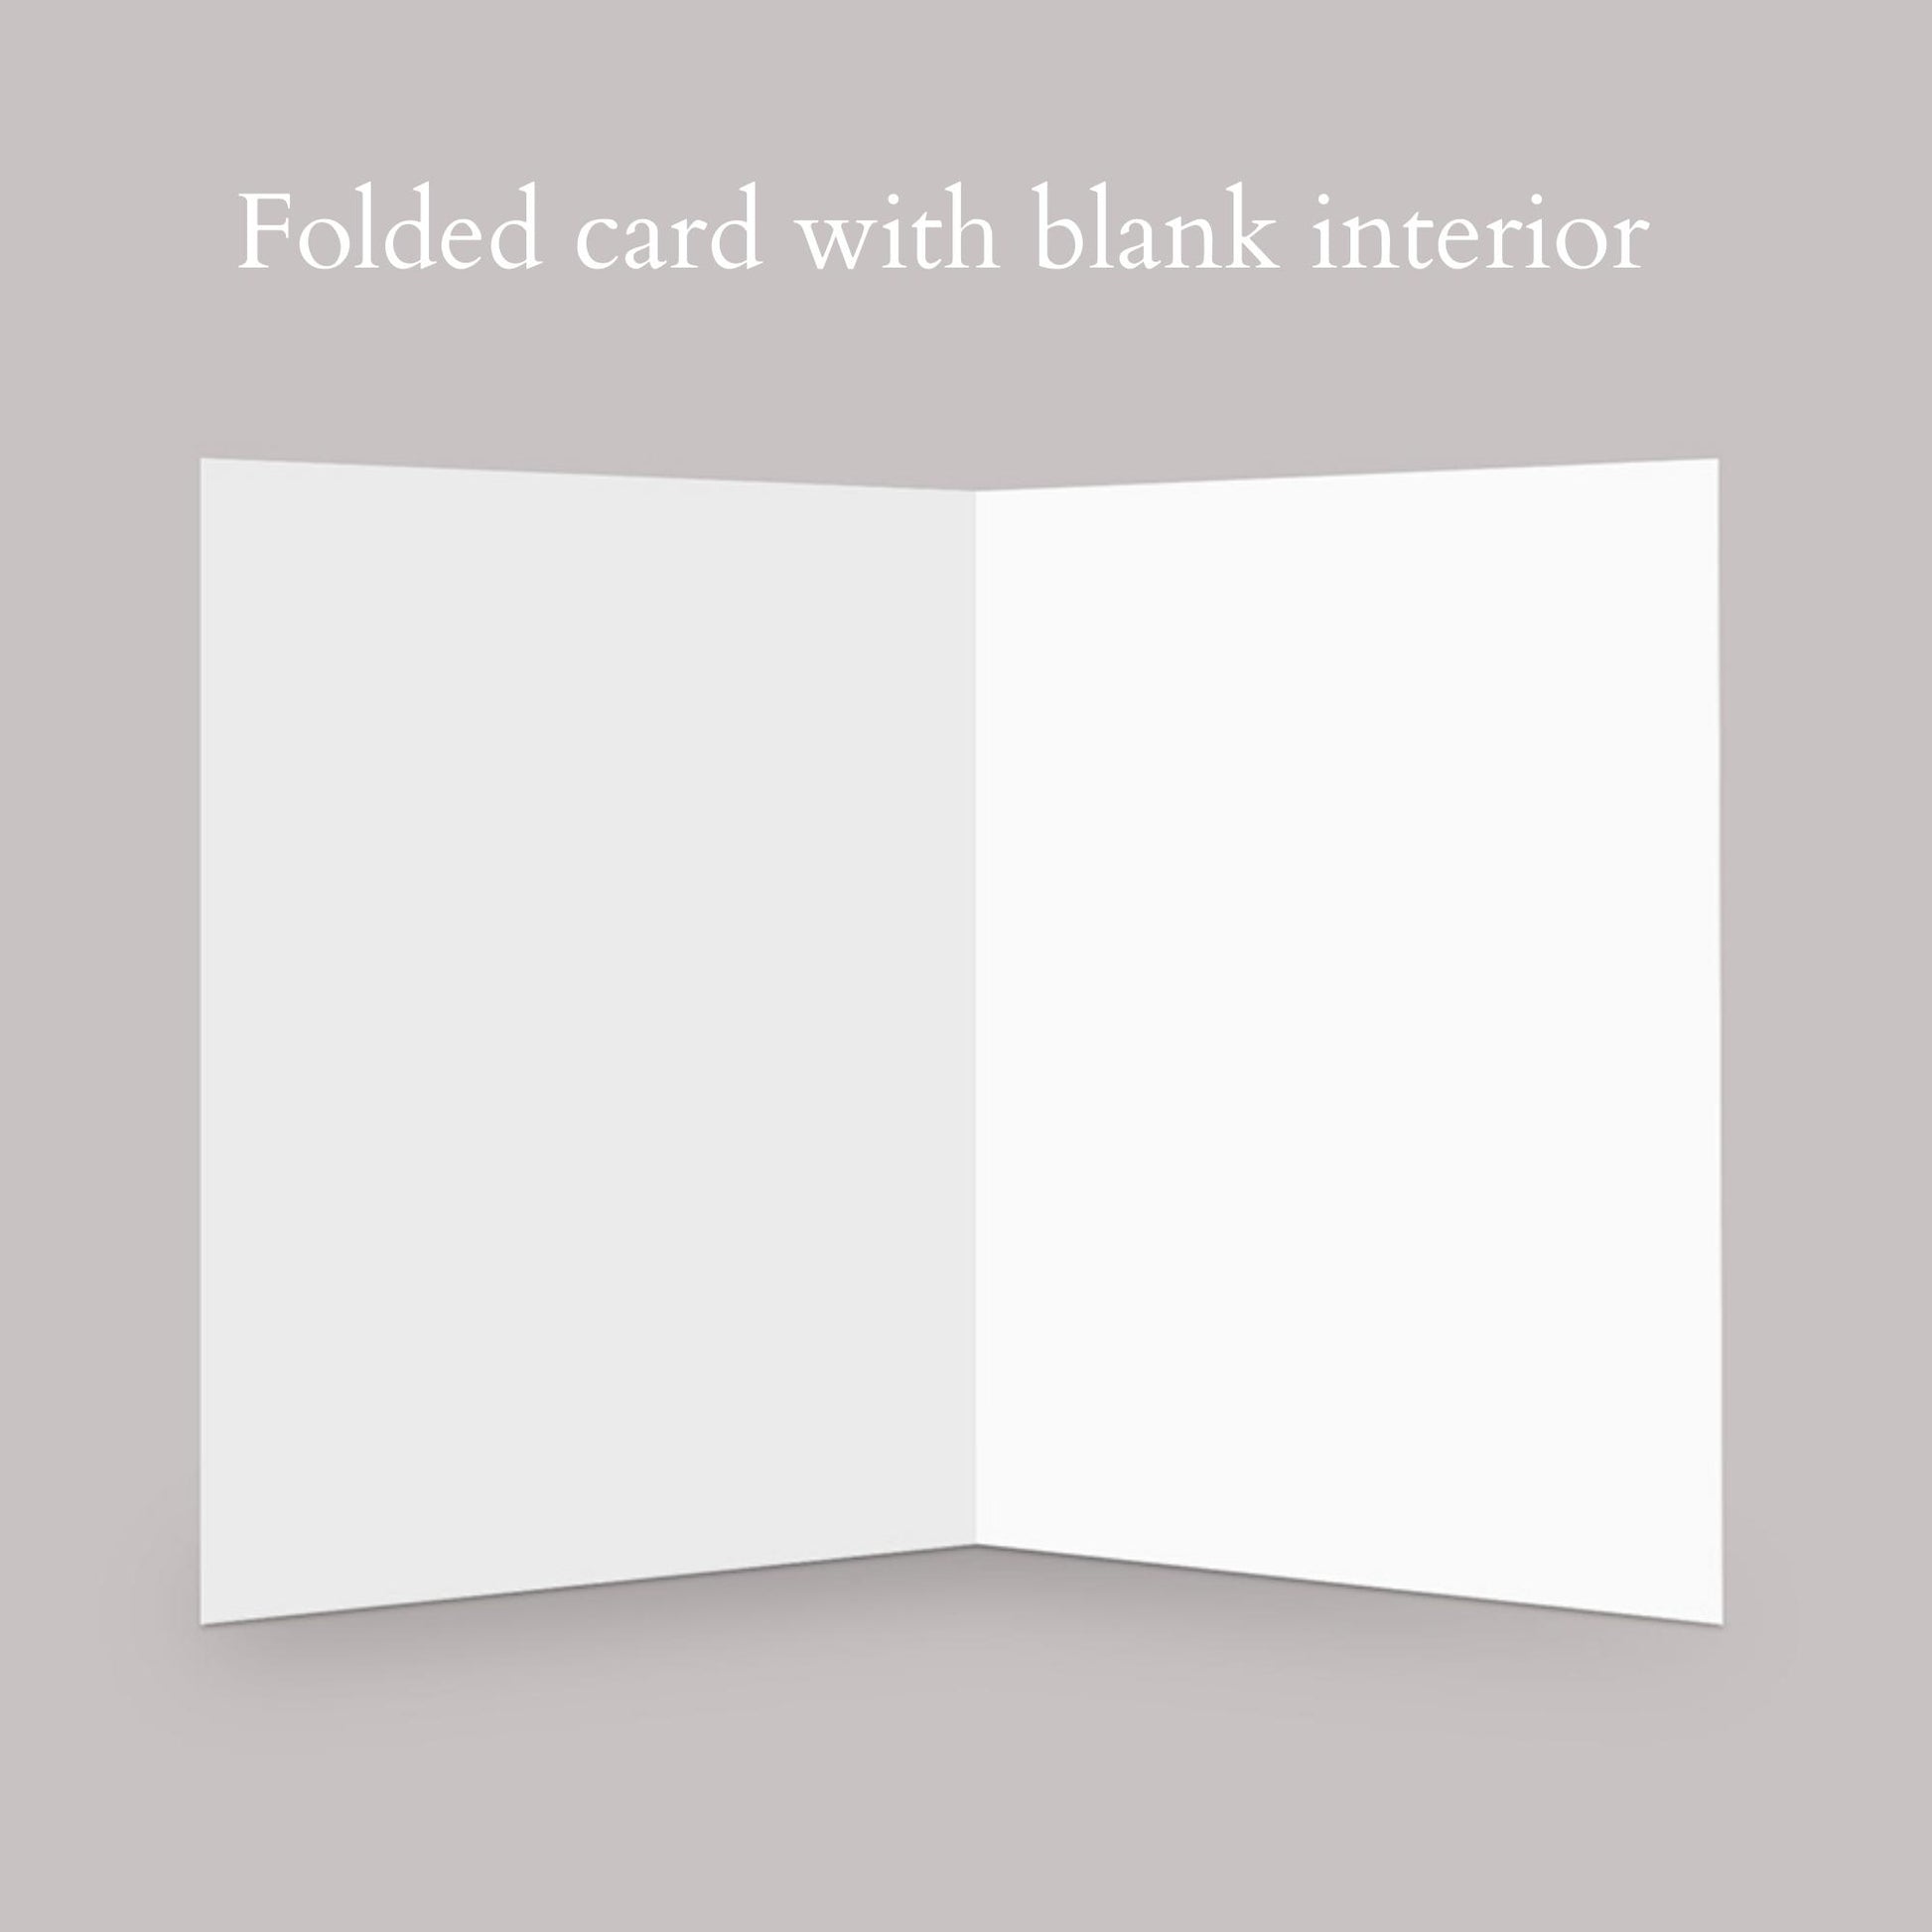 all cards are folded with a blank interior